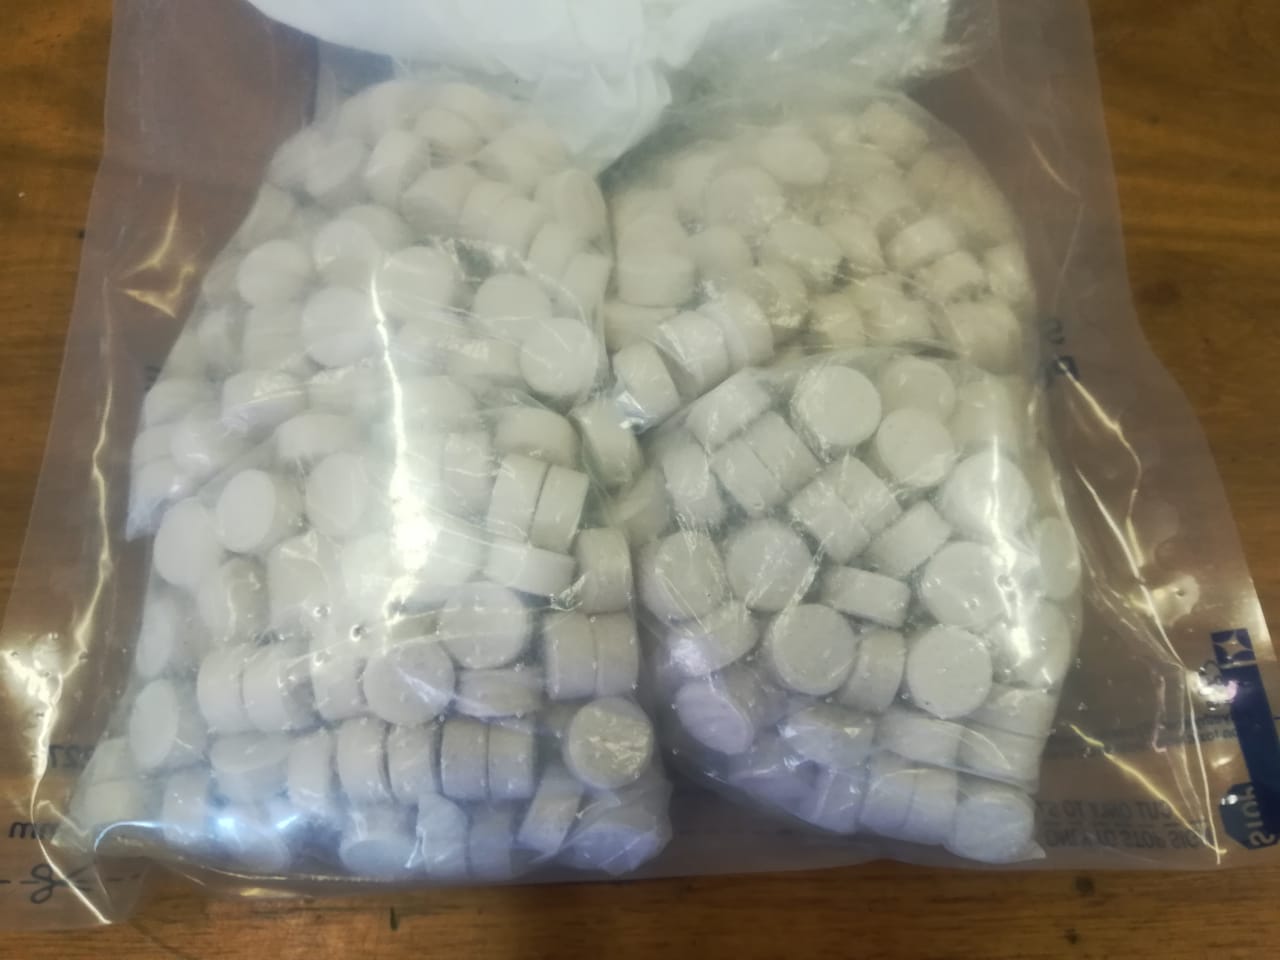 Two suspects have been arrested in the Western Cape in two seperate incidents for the possession of drugs.